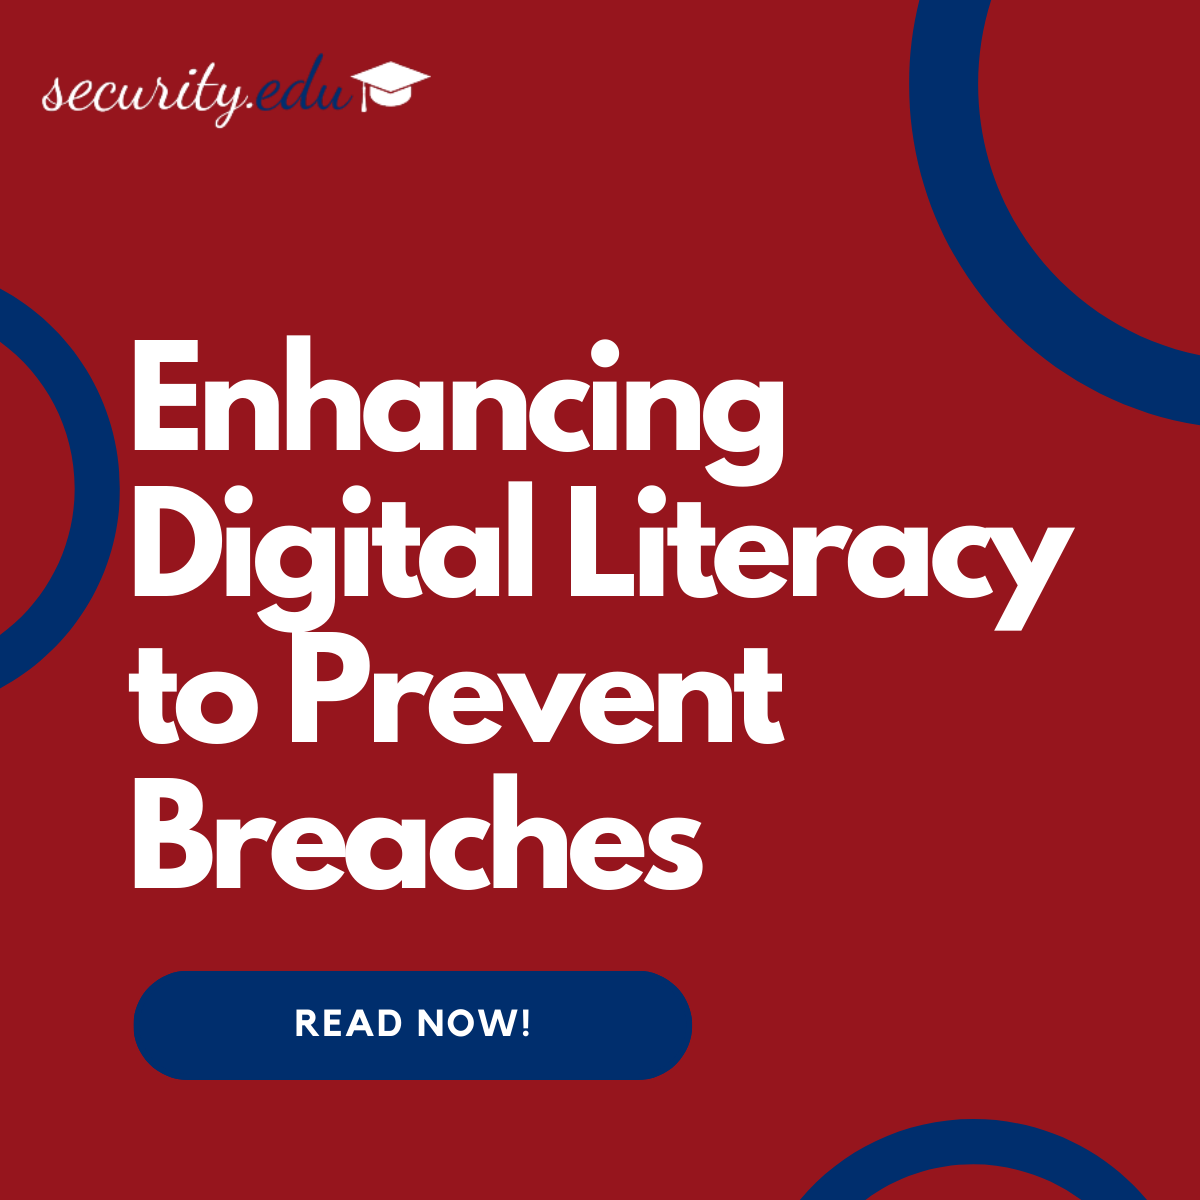 Featured image for “Enhancing Digital Literacy to Prevent Breaches”